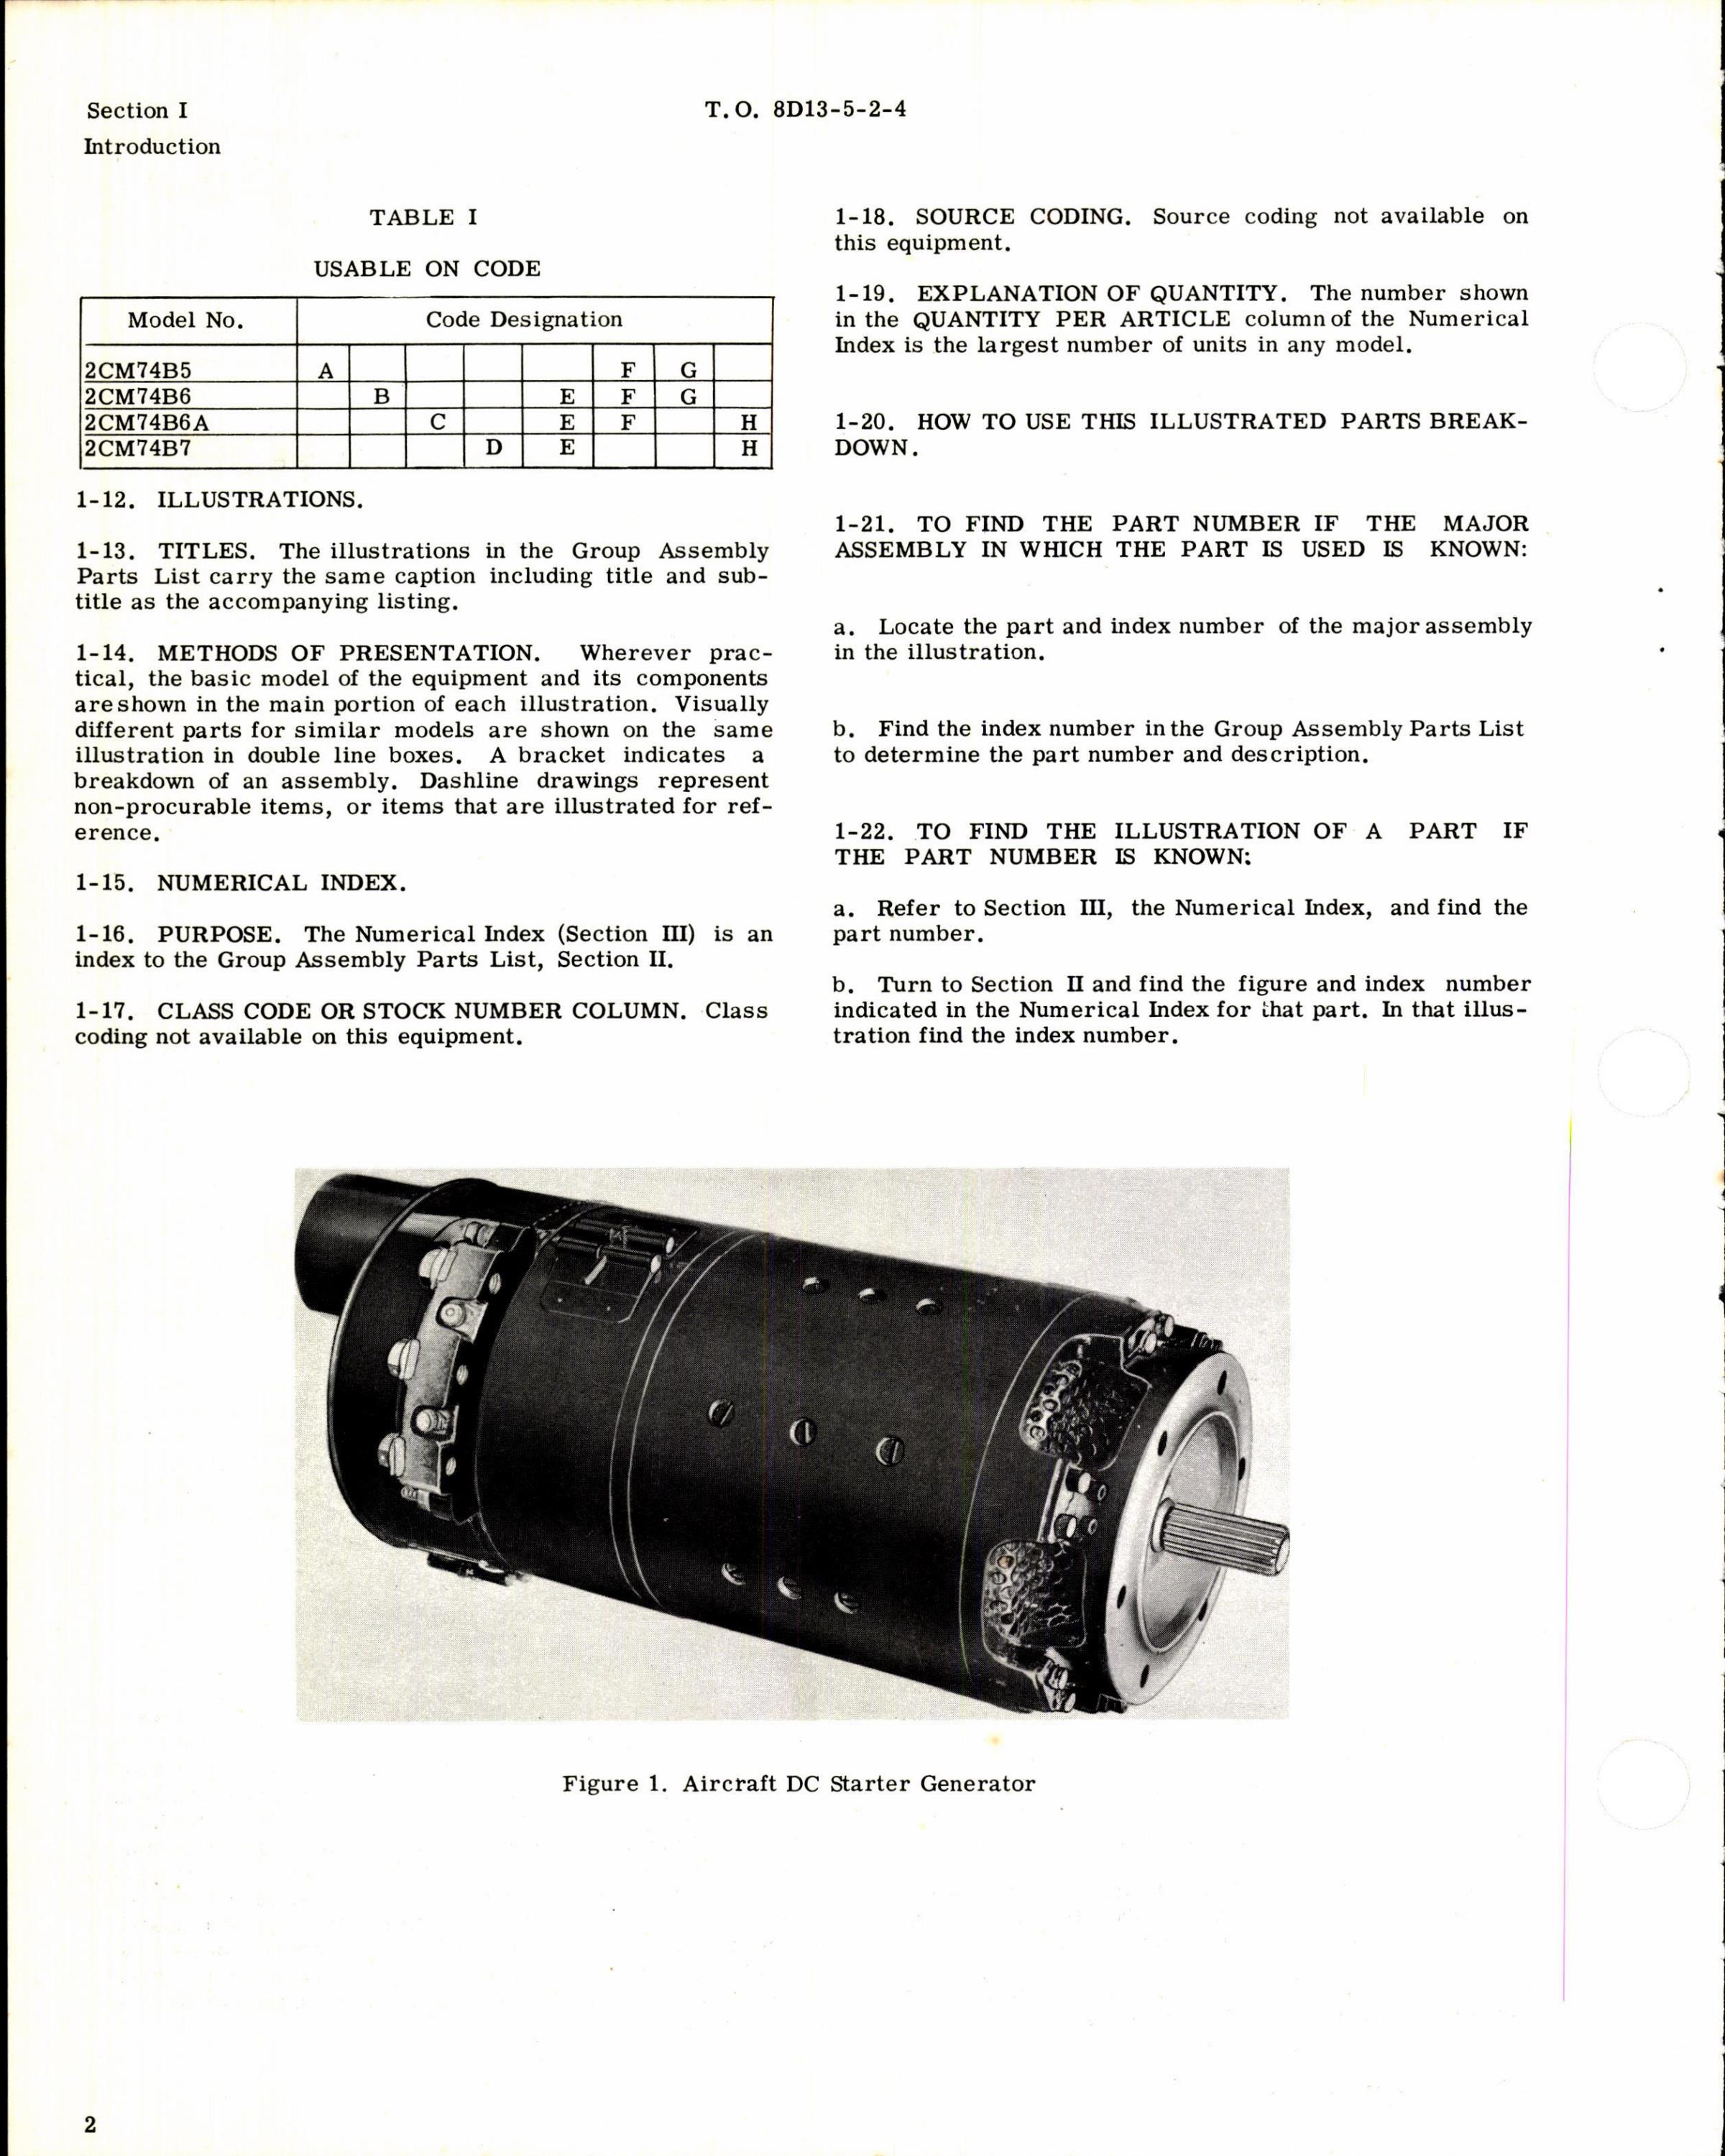 Sample page 2 from AirCorps Library document: Illustrated Parts Breakdown for Aircraft DC Starter Generator